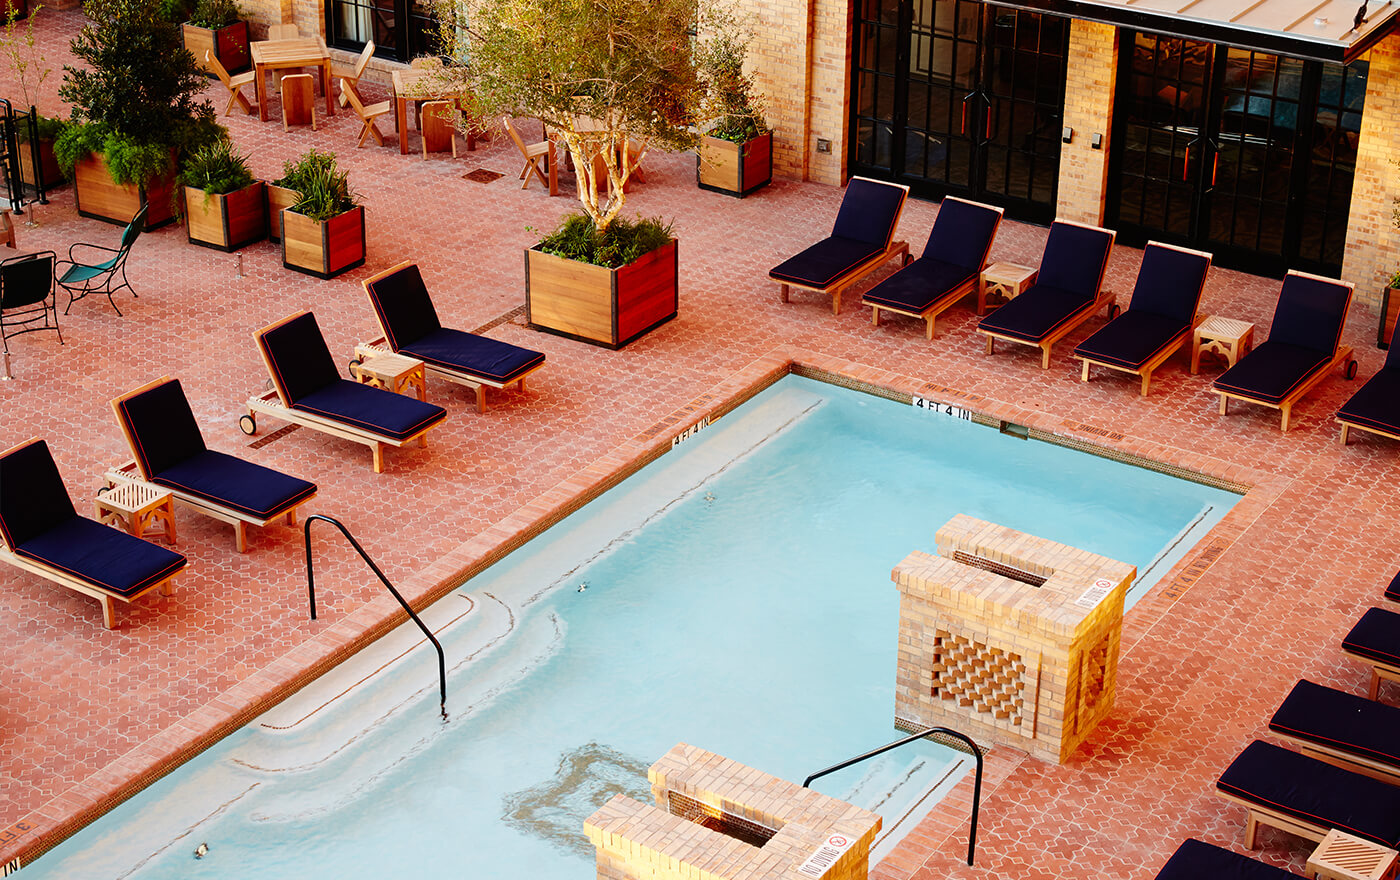 Picture of Hotel Emma's pool.